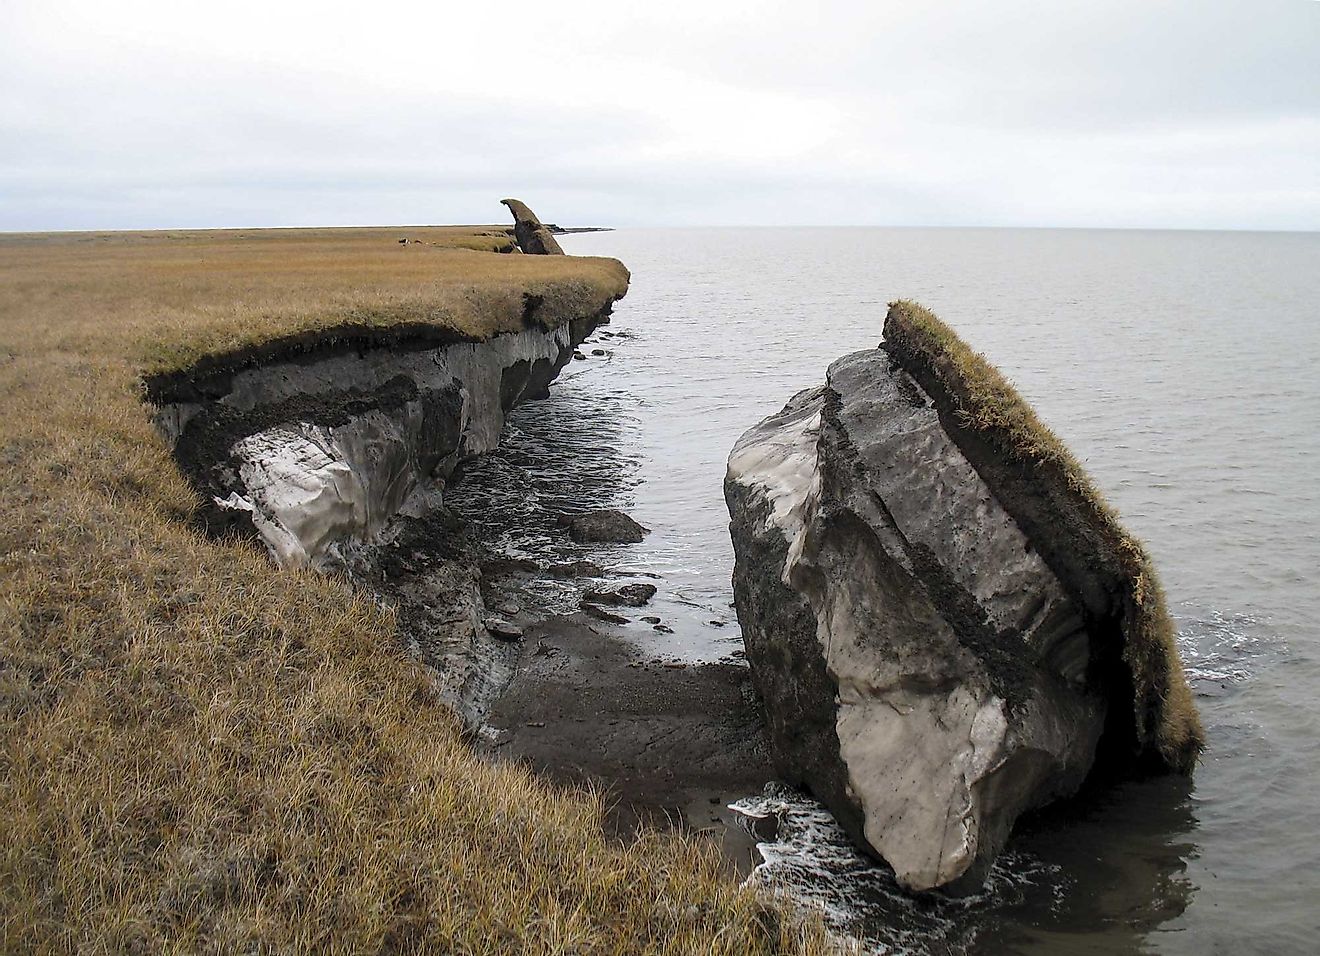 In this photo you can see a collapsed block of ice-rich permafrost along Drew Point, Alaska. Image credit: Benjamin Jones, USGS